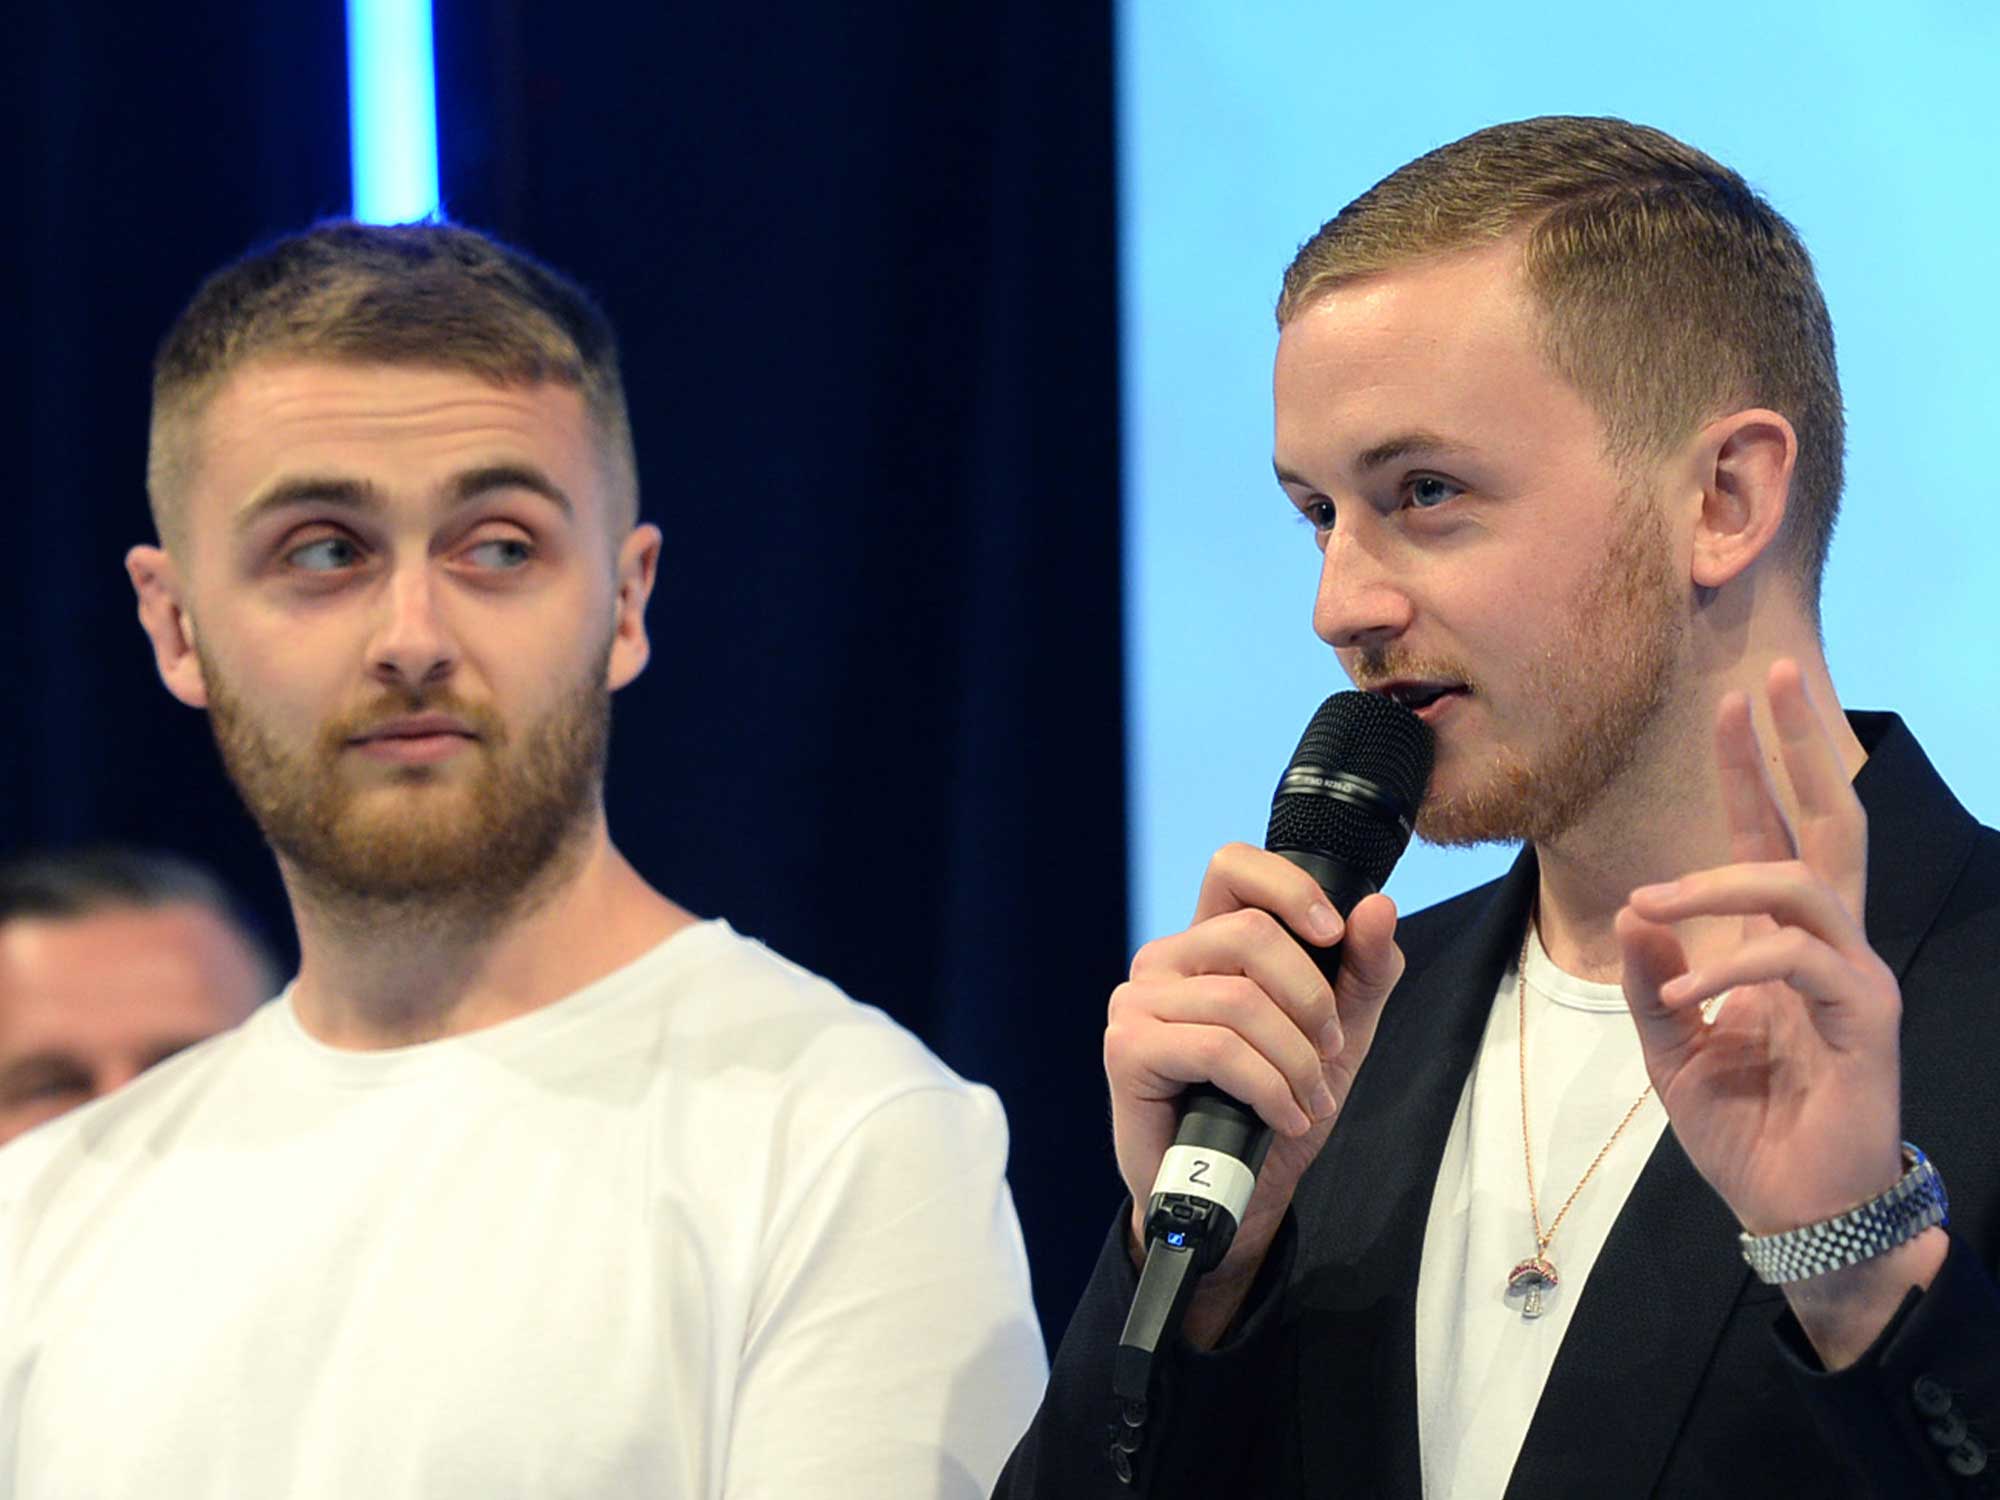 Howard Lawrence and Guy Lawrence of Disclosure on stage during the Nordoff Robbins O2 Silver Clef Awards 2019 at Grosvenor House on July 05, 2019 in London, England.